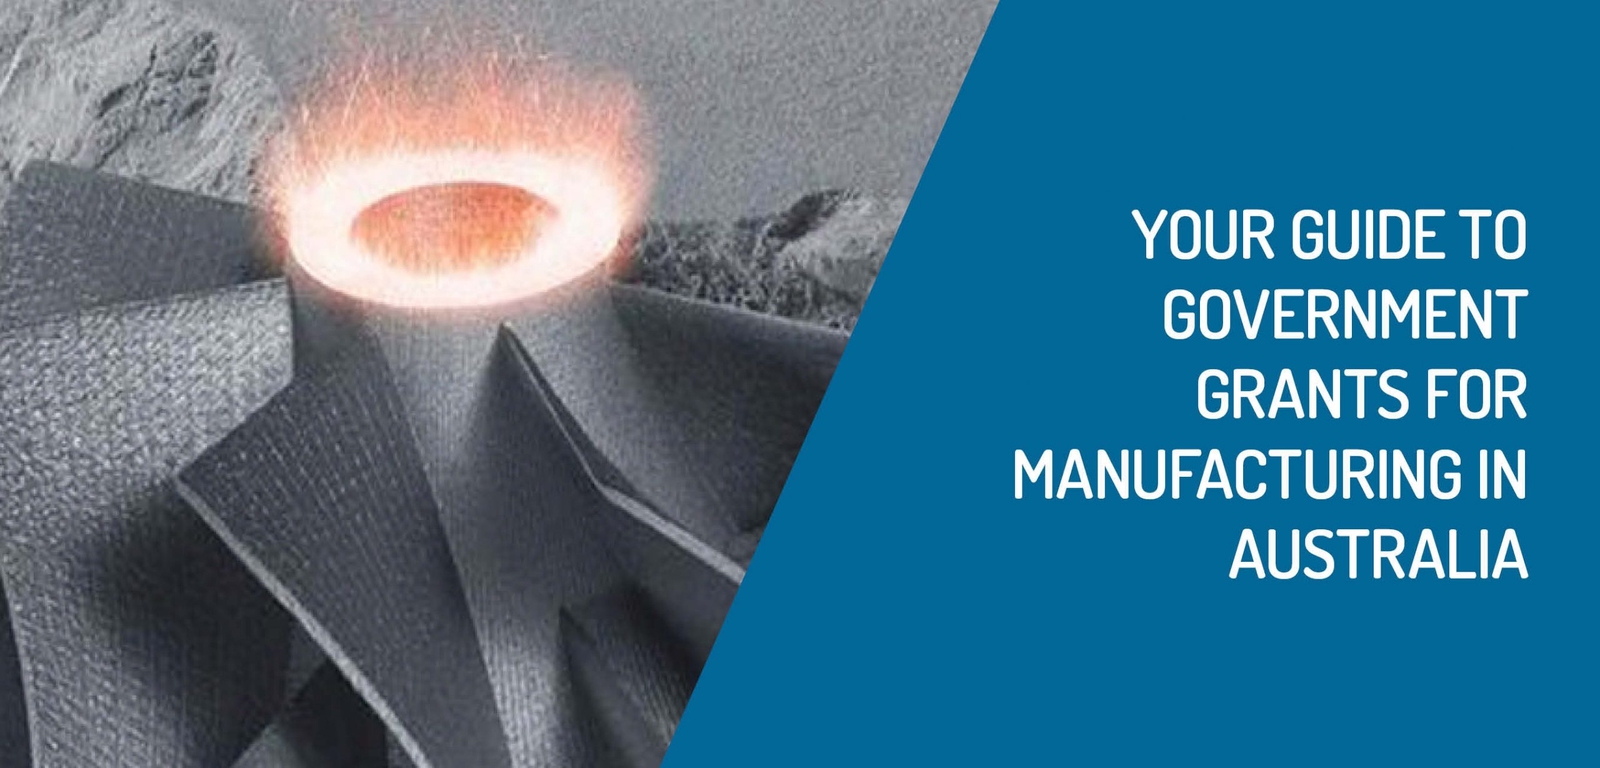 Your Guide to Government Grants for Manufacturing in Australia